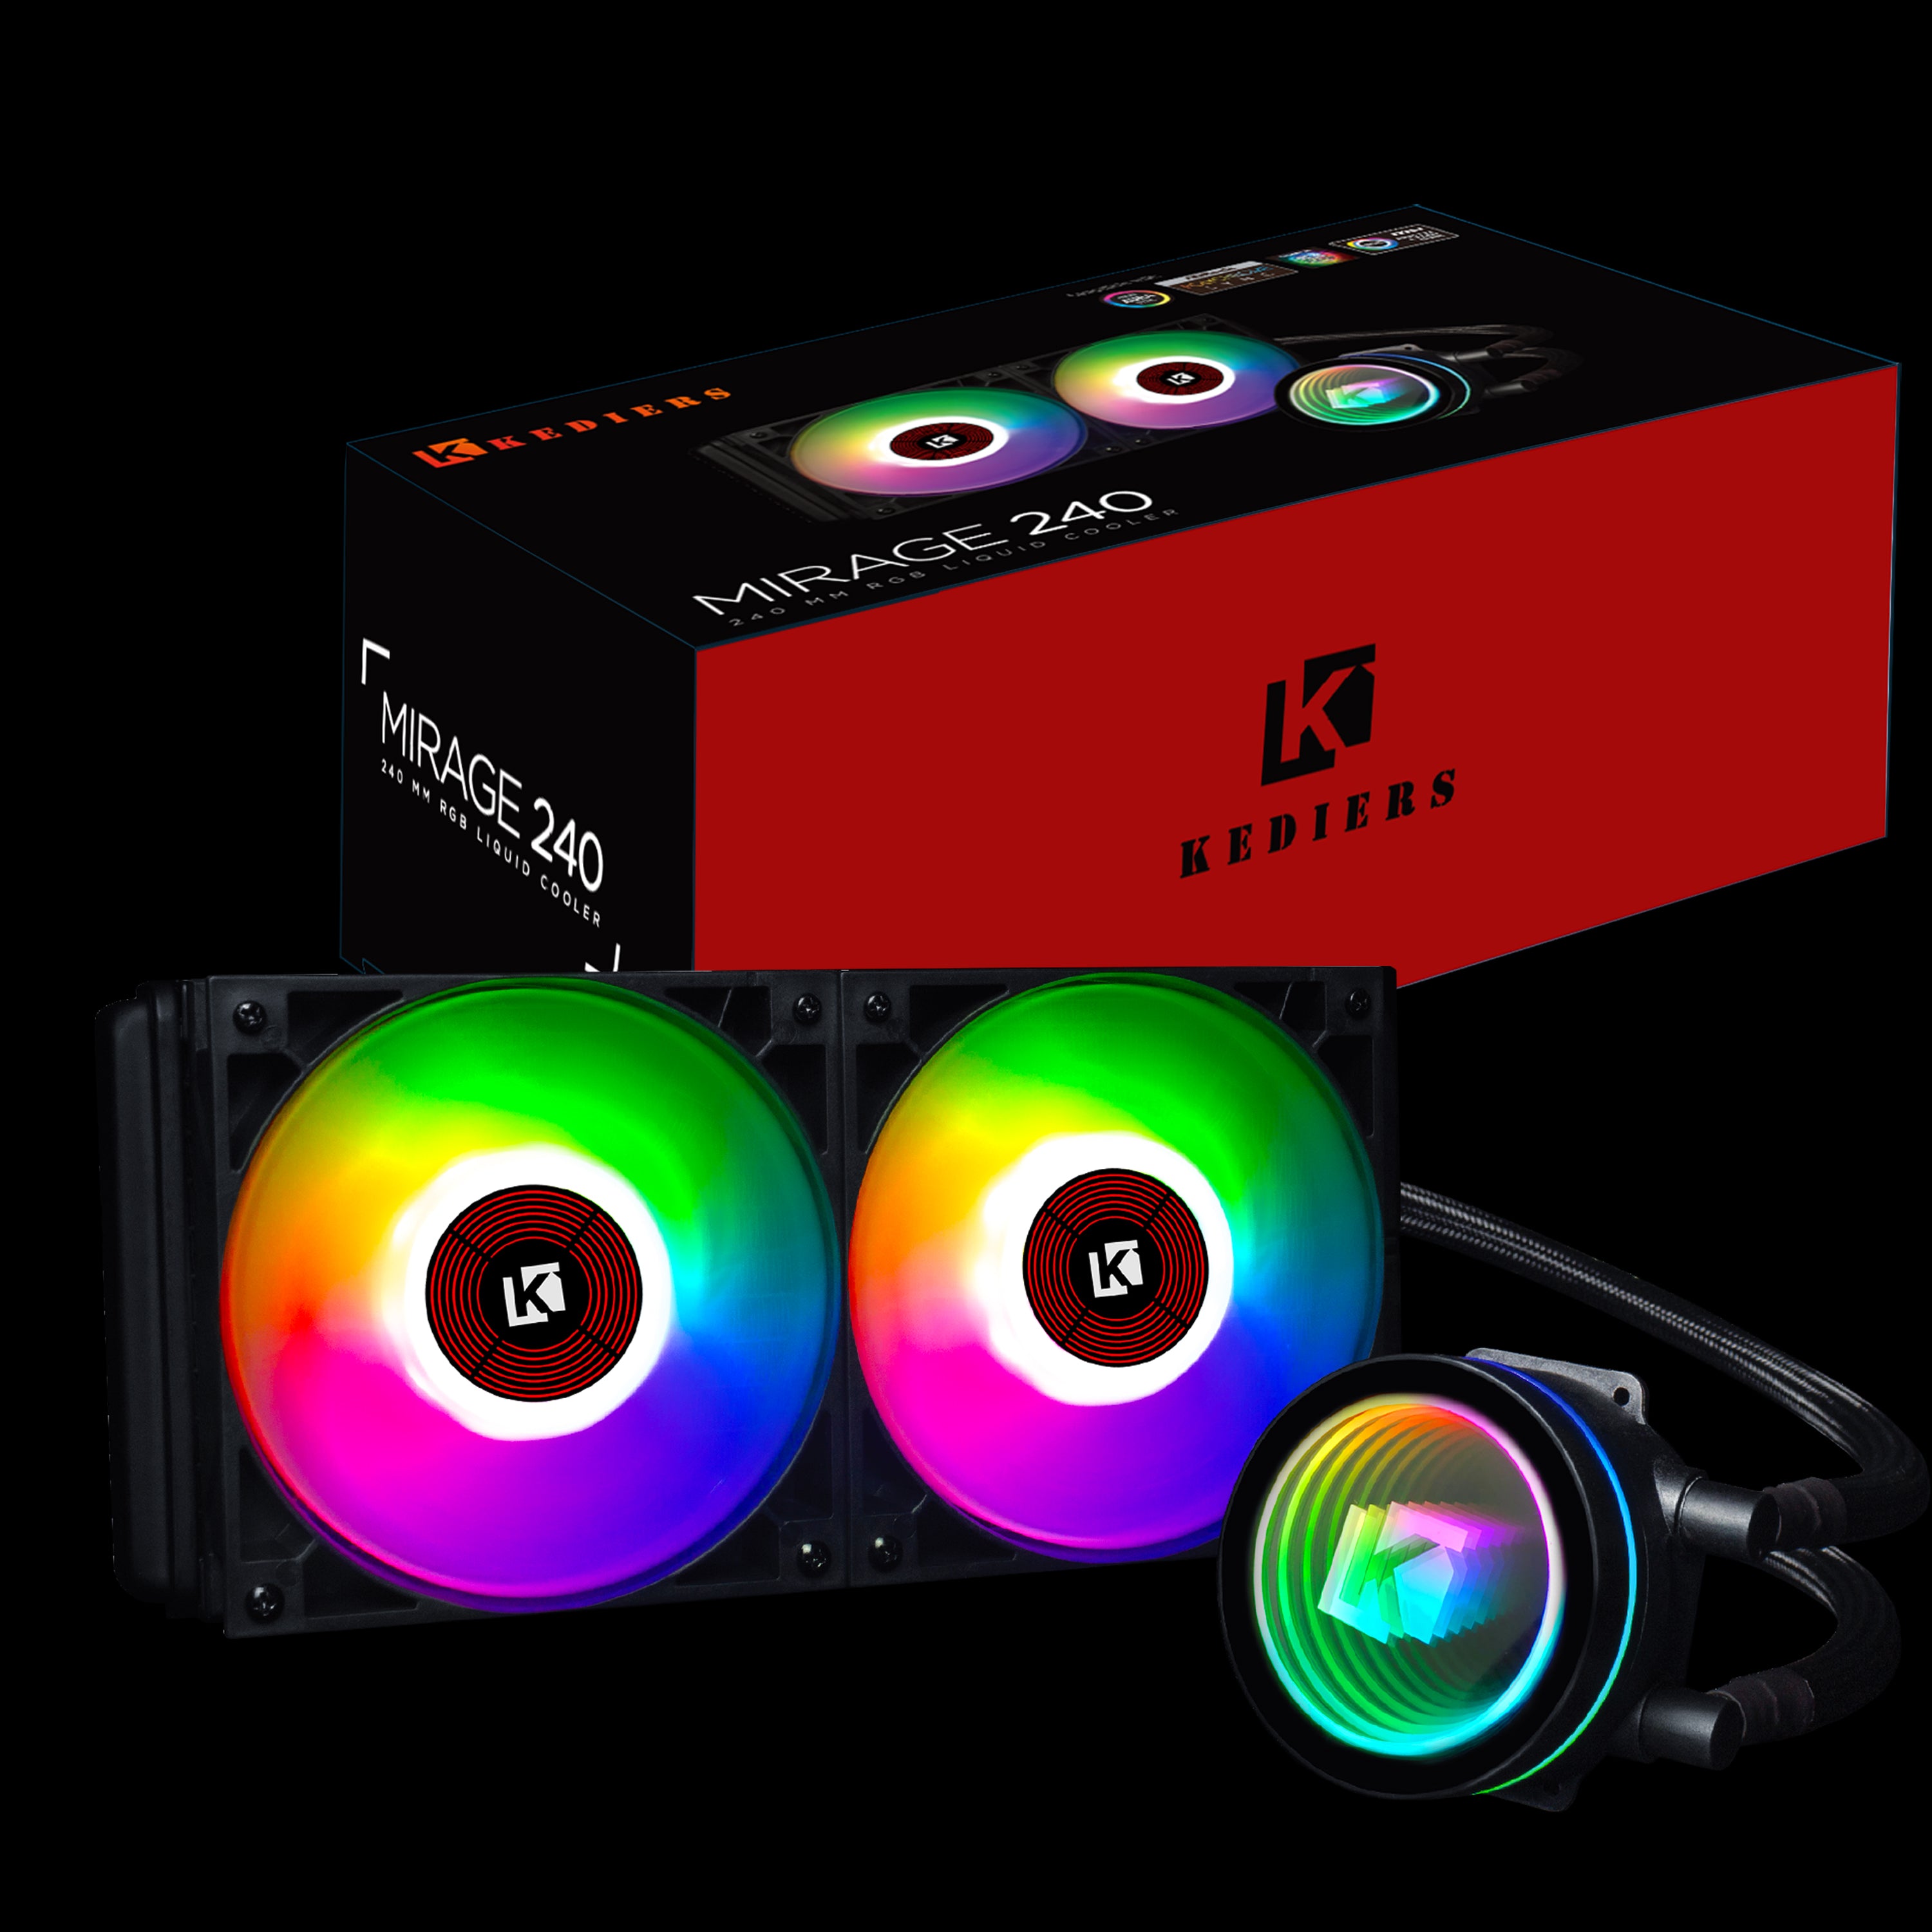 KEDIERS 240mm AIO RGB CPU Liquid Cooler Rotating Infinity Mirror Design RGB Connector 120mm Radiator RGB Fans Motherboard Synchronization and Intelligent Temperature Control